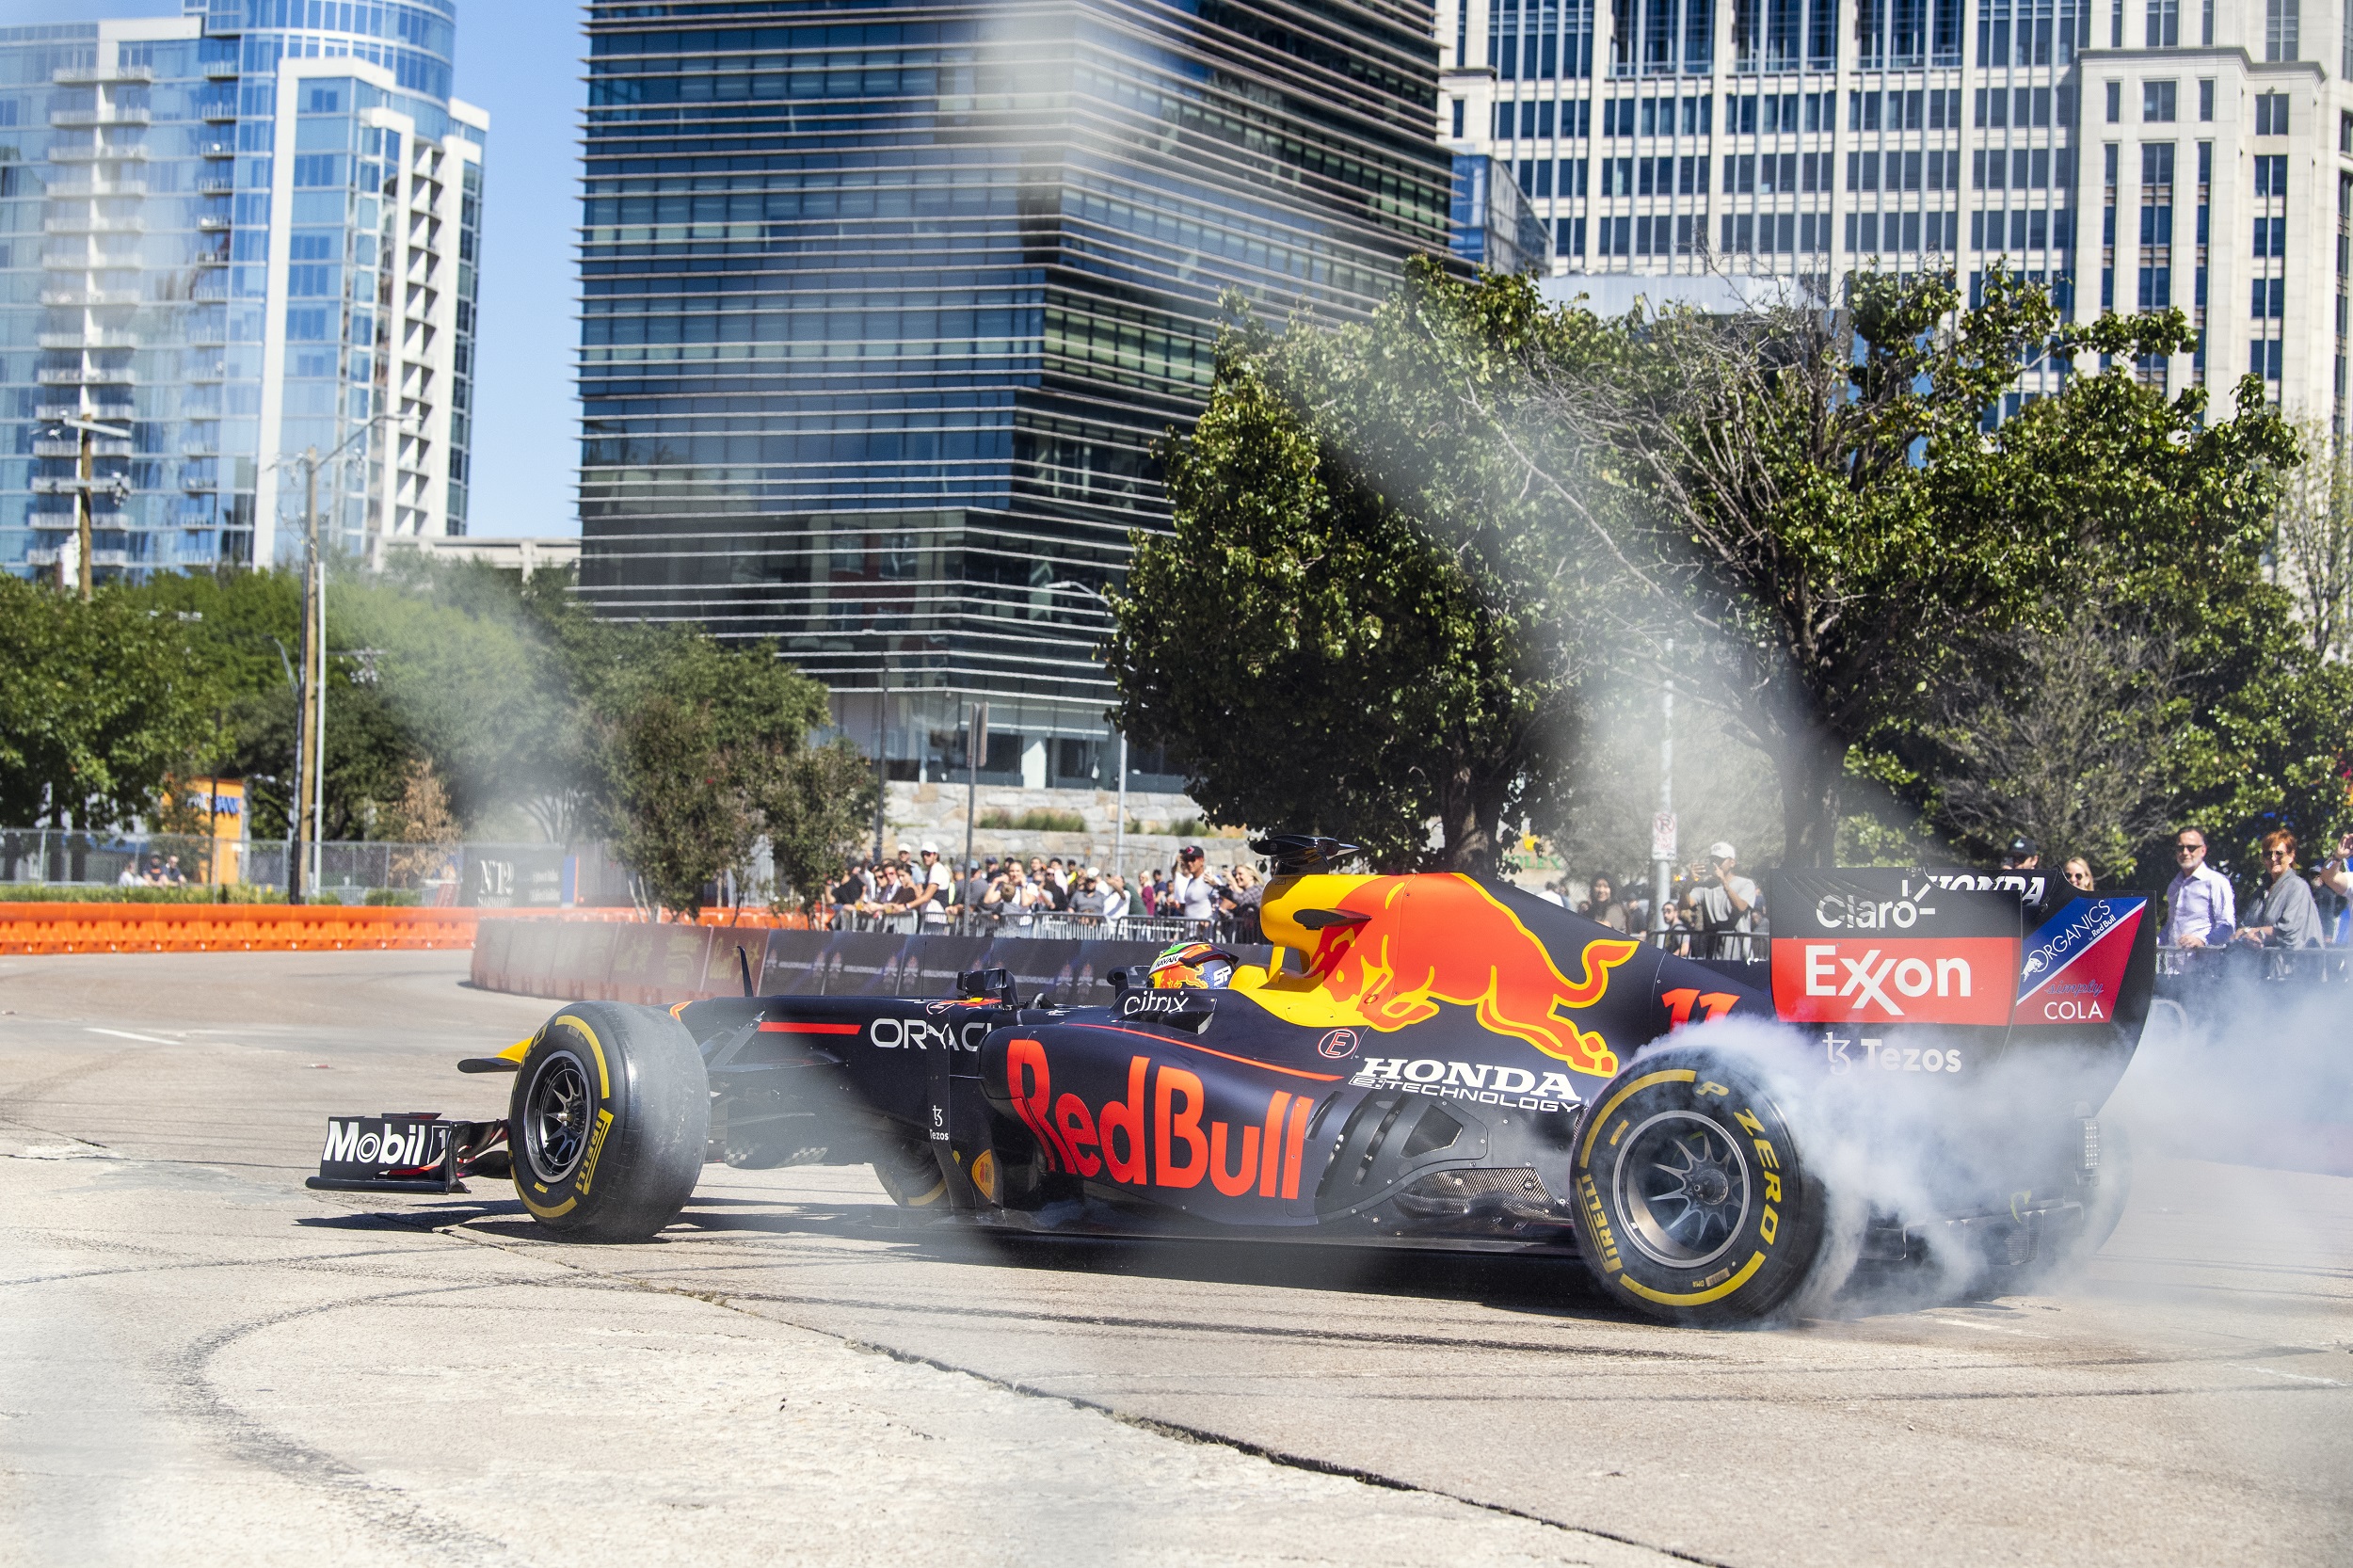 Sergio “Checo” Perez drives the RB7 car at Red Bull Show Run in Dallas, Texas, USA on 16 October, 2021.